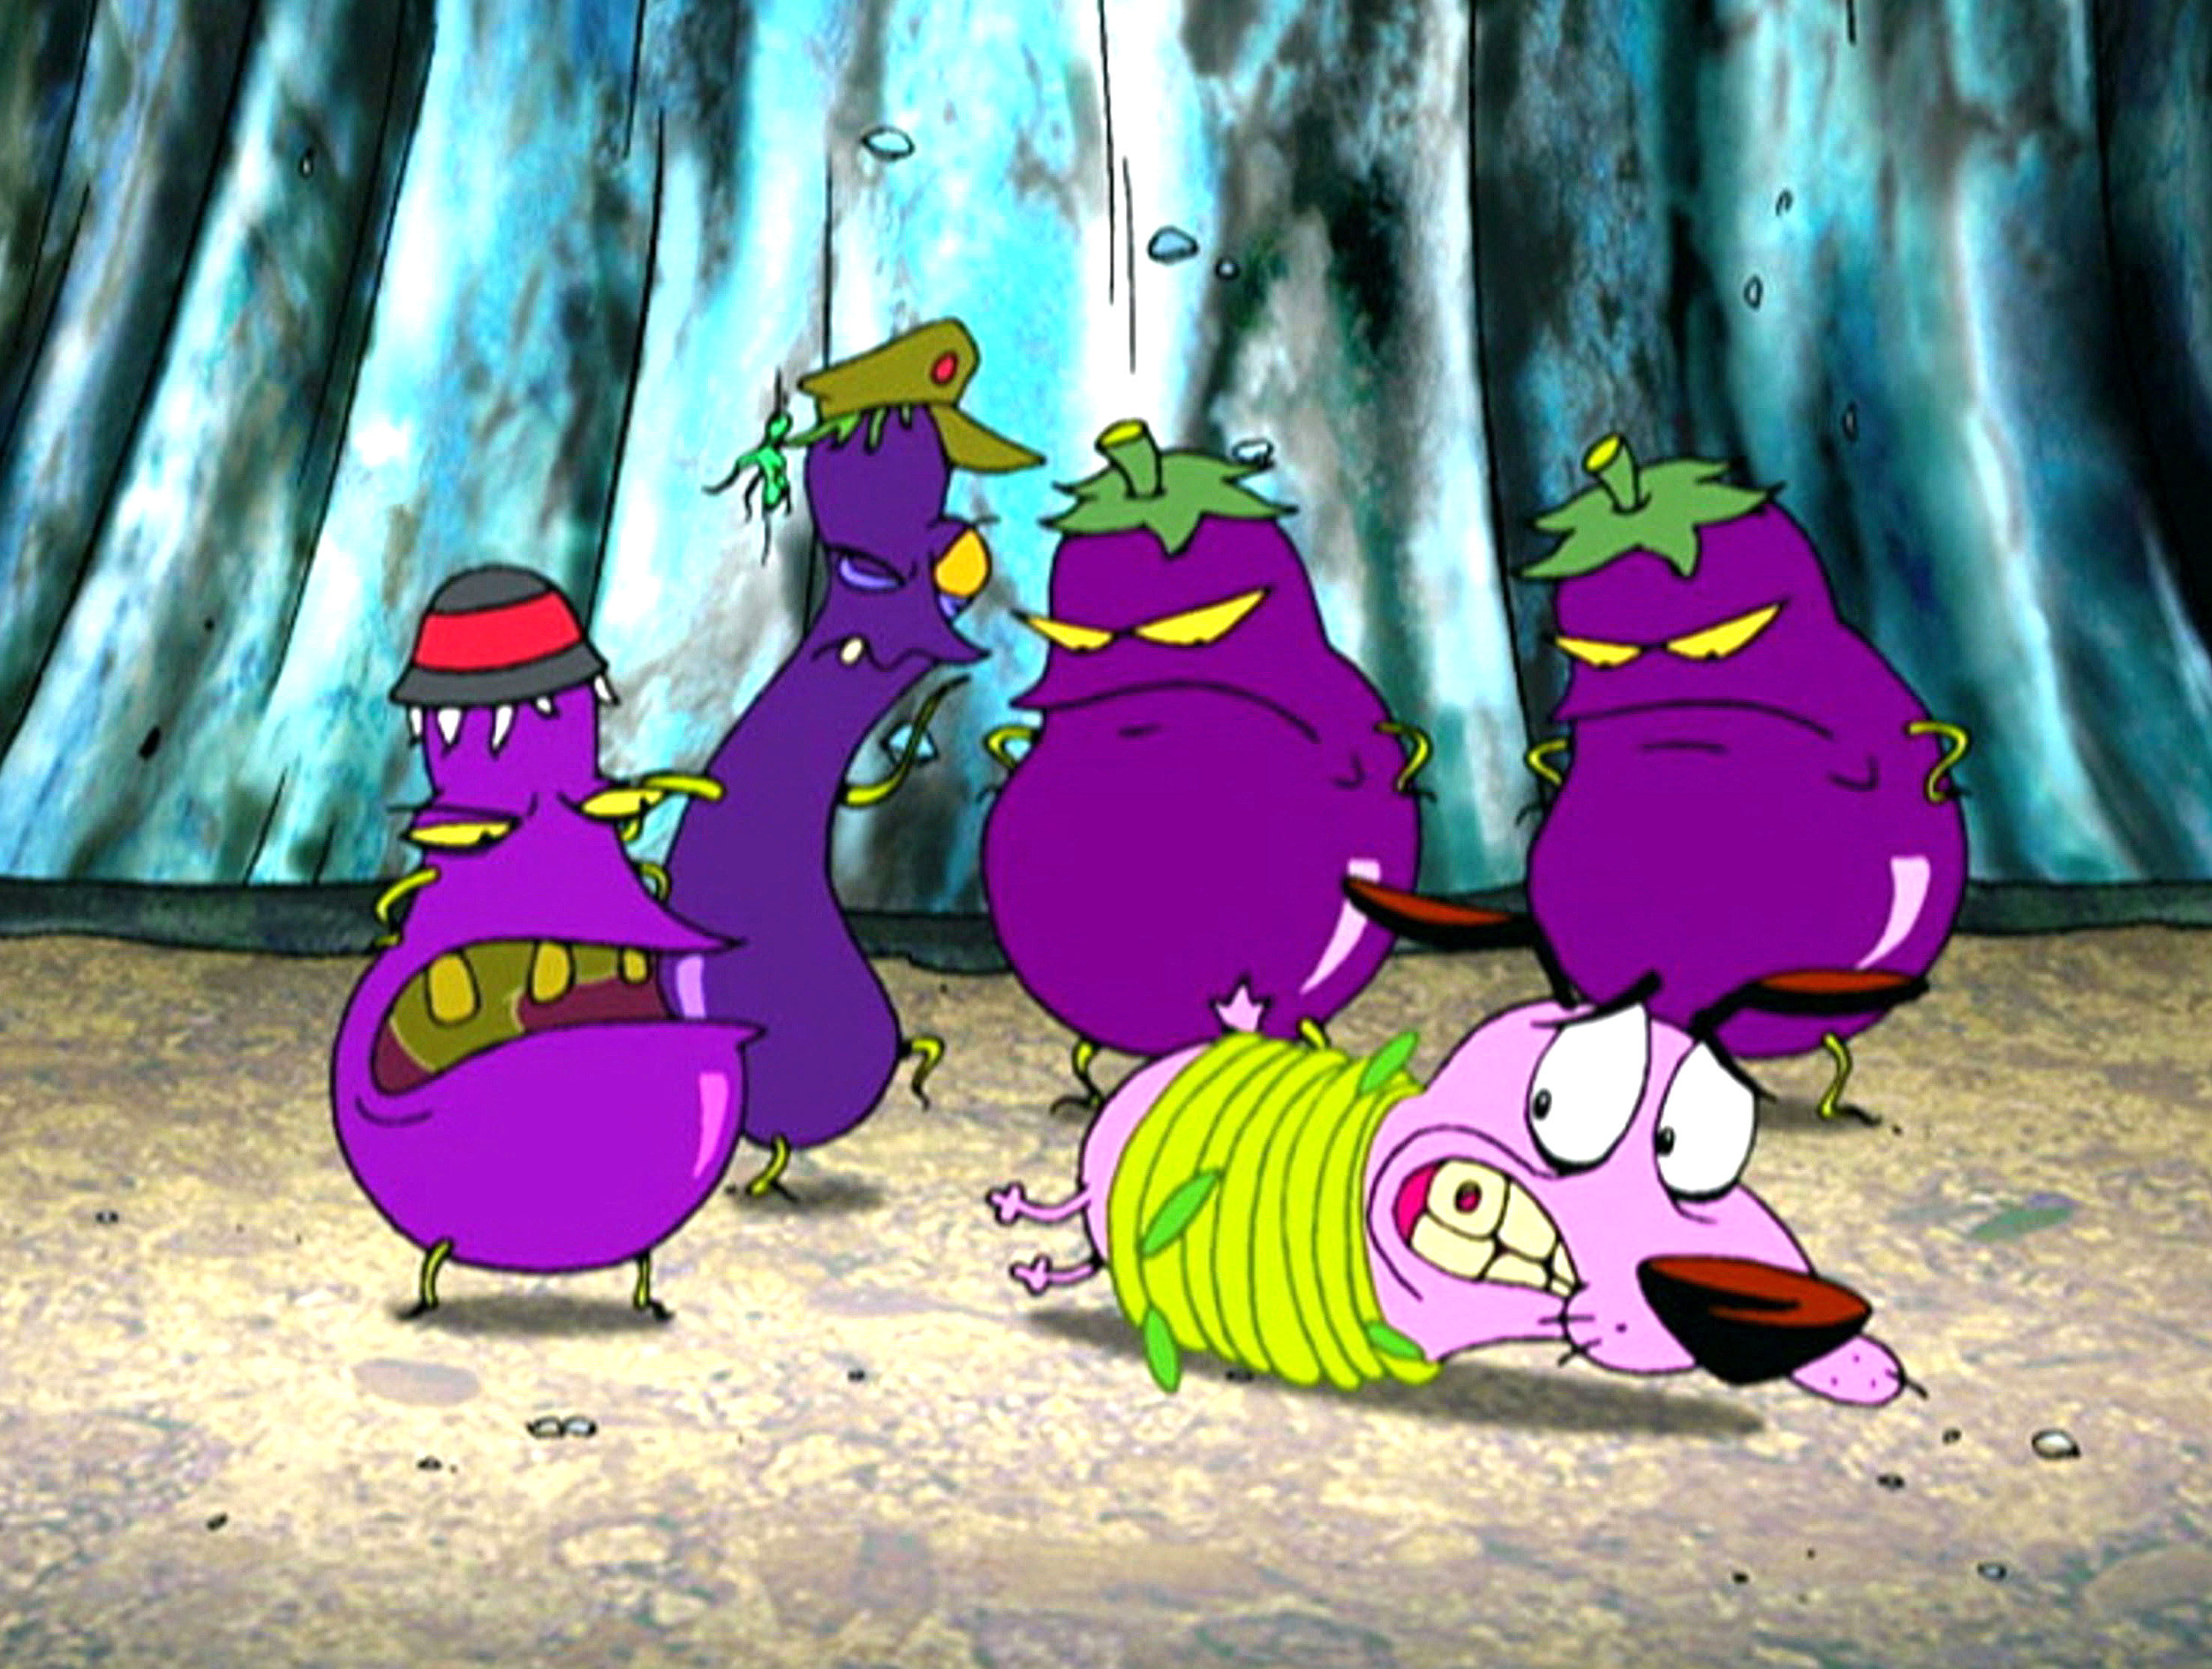 Courage the Cowardly Dog (pink dog with hole in his tooth) is held hostage by evil eggplants